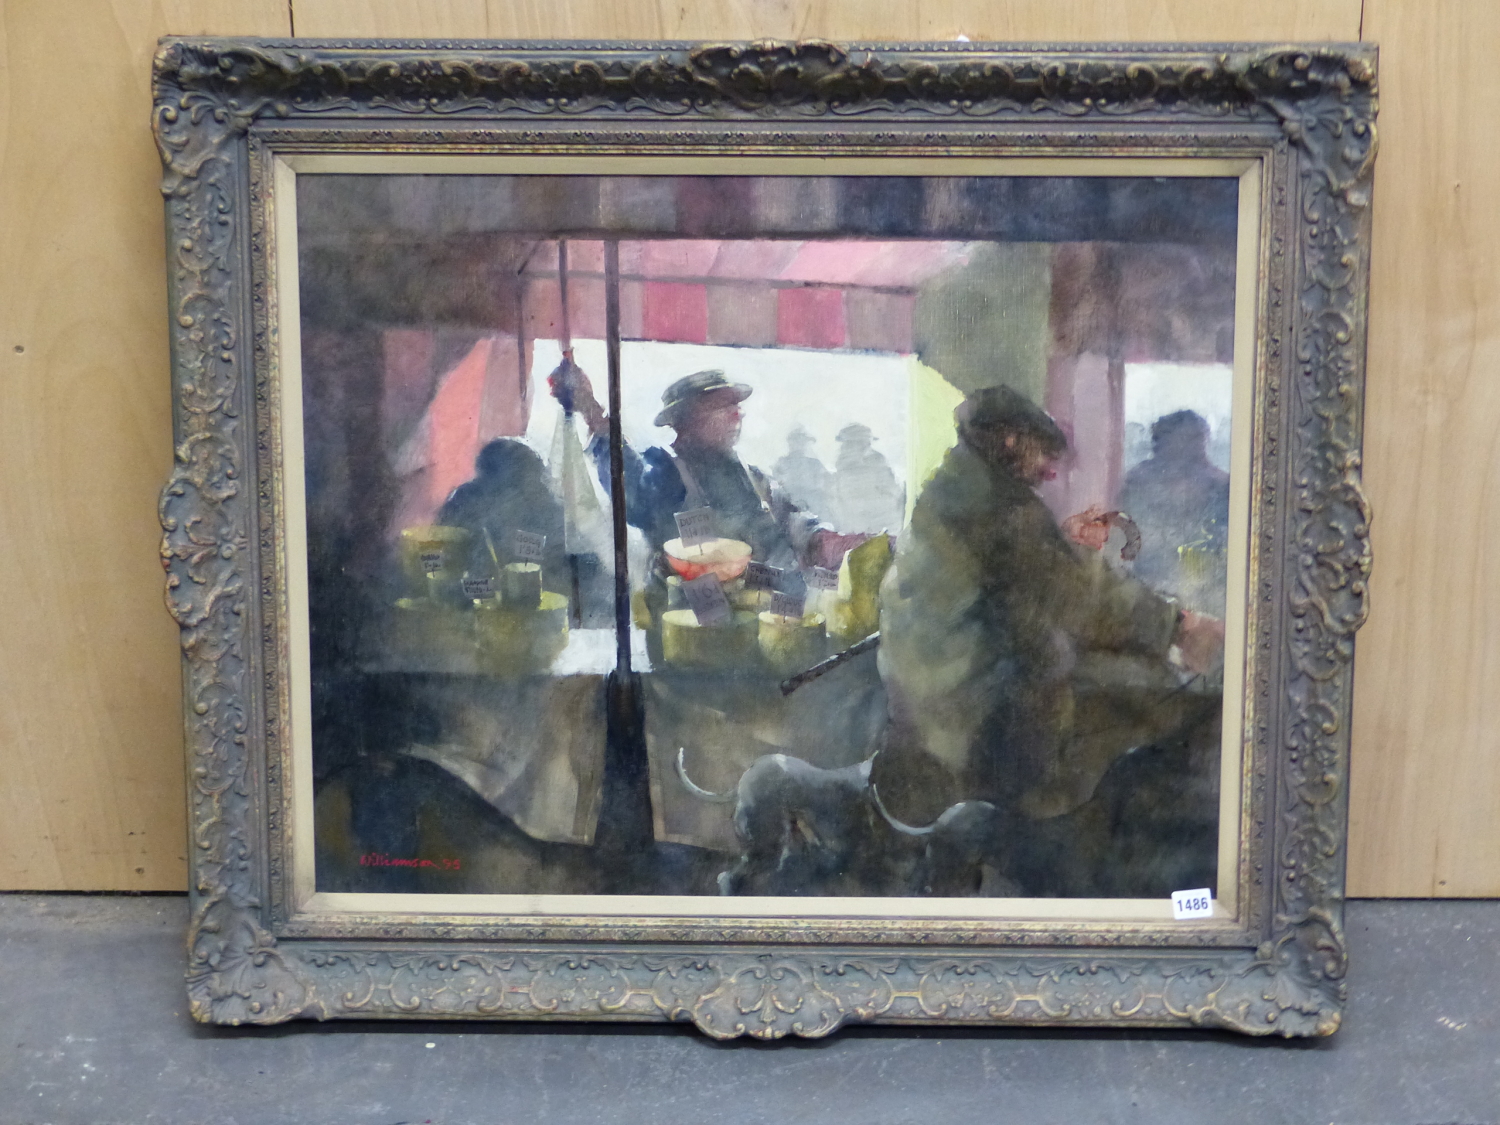 LAWRIE WILLIAMSON (1932-2017) ARR. MARKET DAY, SIGNED, OIL ON CANVAS, GALLERY LABEL VERSO. 61 x - Image 2 of 9